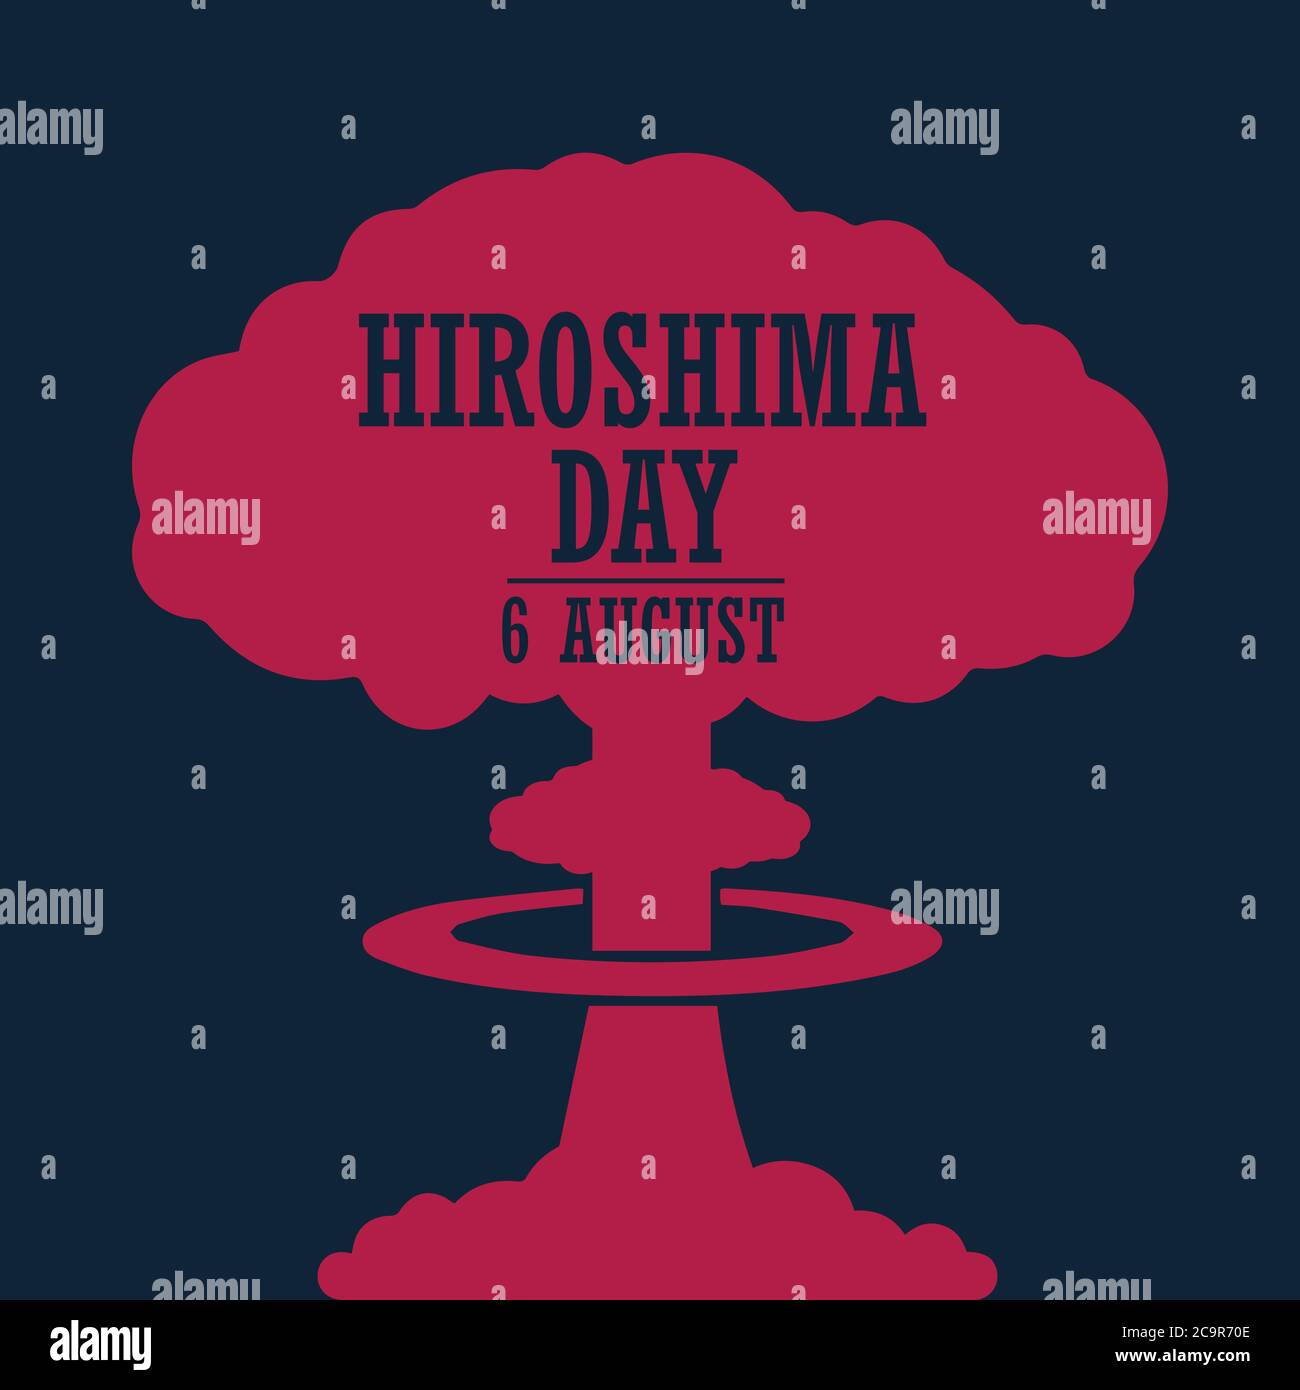 Hiroshima Day, 6 august, red colored nuclear bomb explosion poster, flat illustration, vector Stock Vector